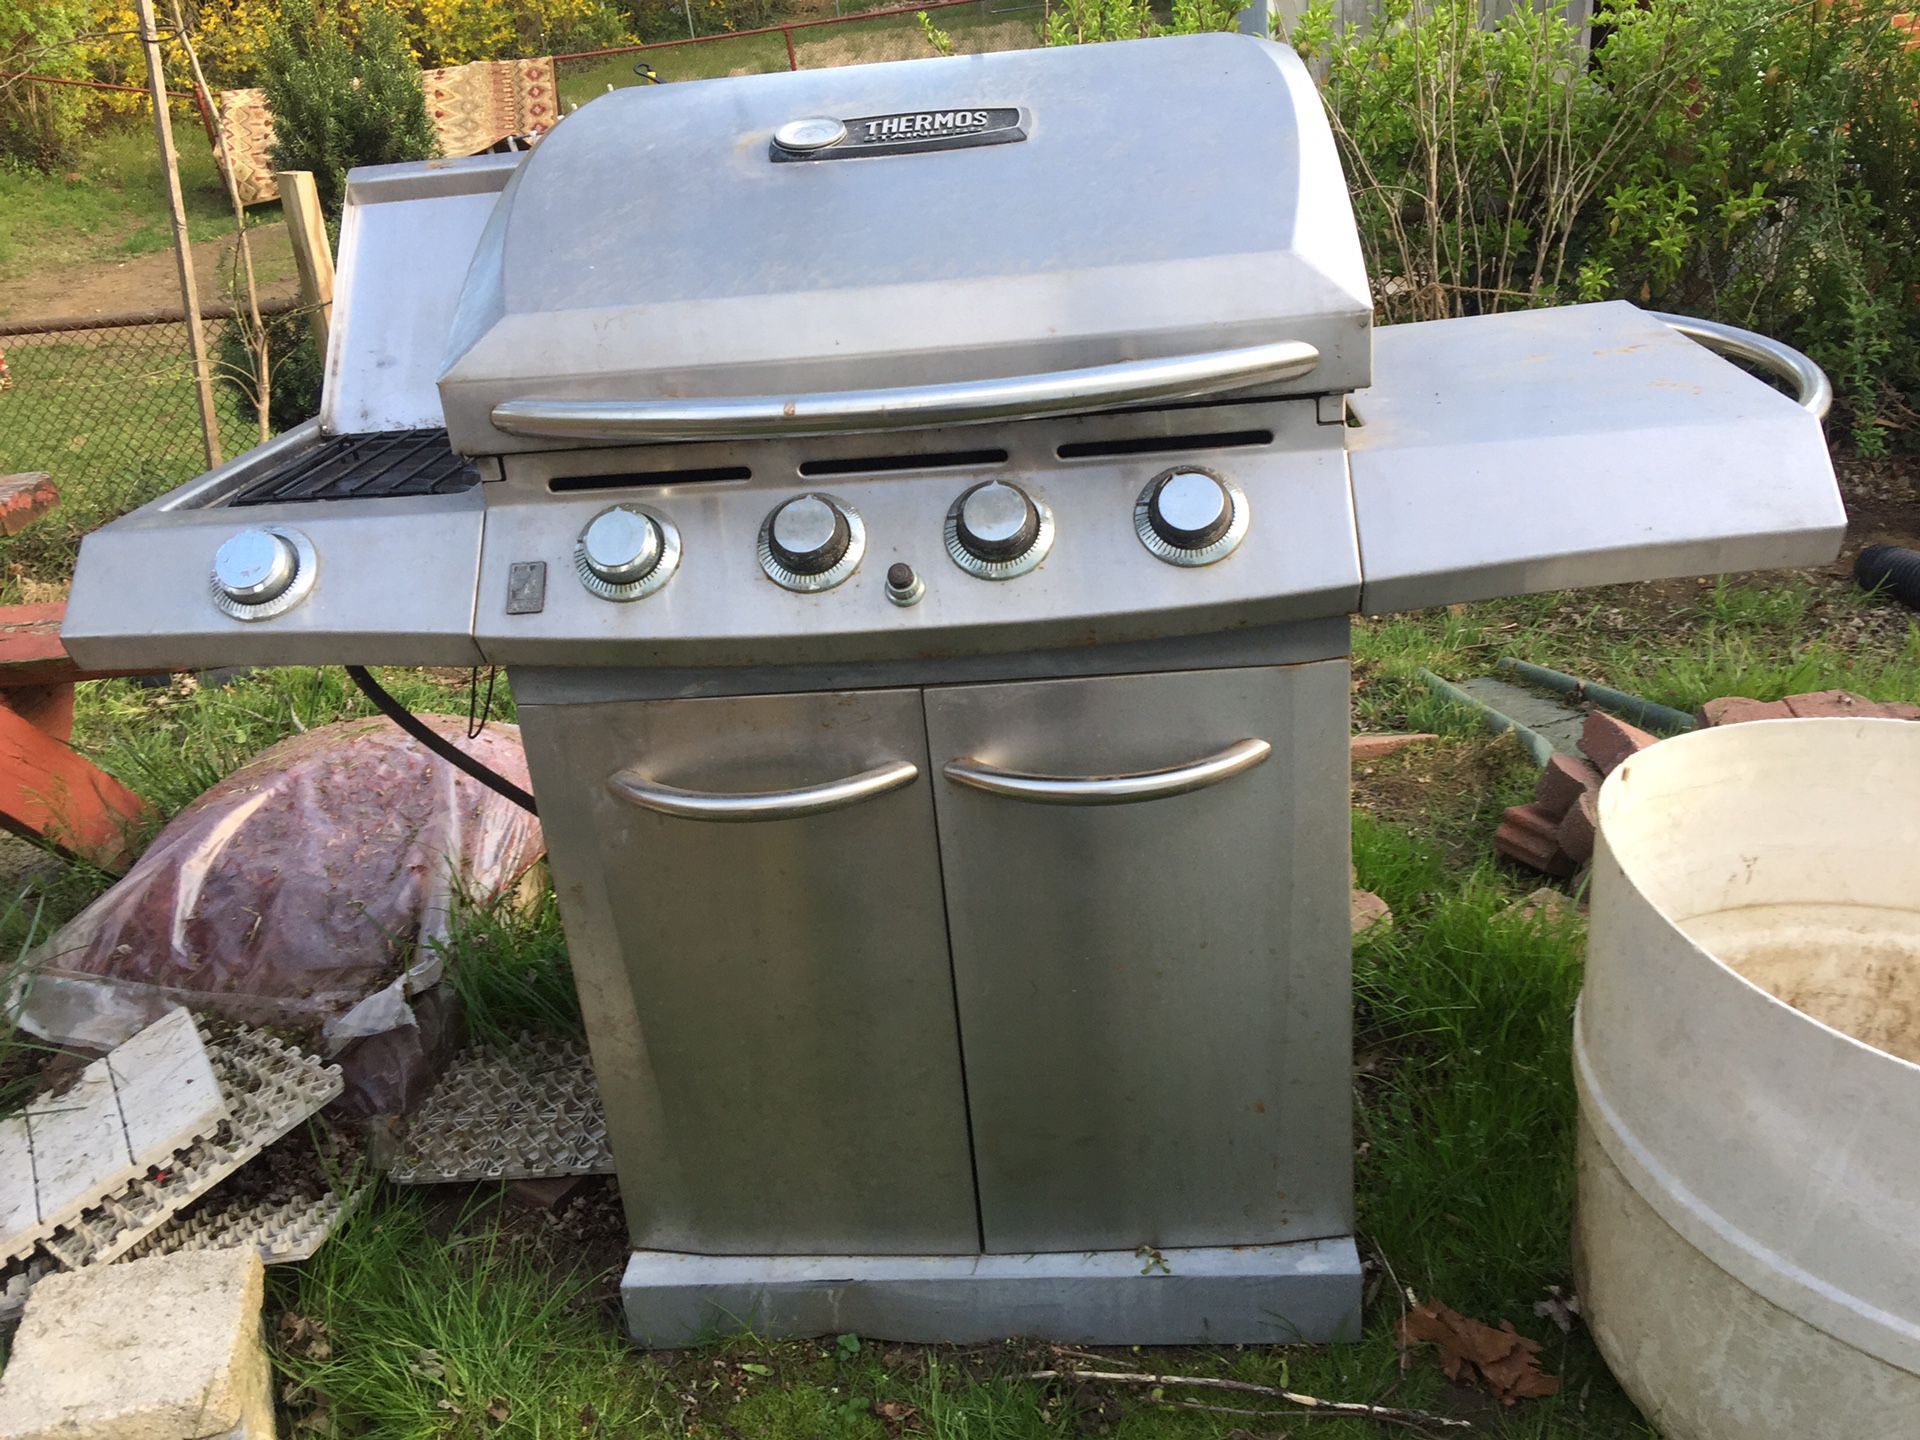 Grill bbq, stainless steel, with side burner